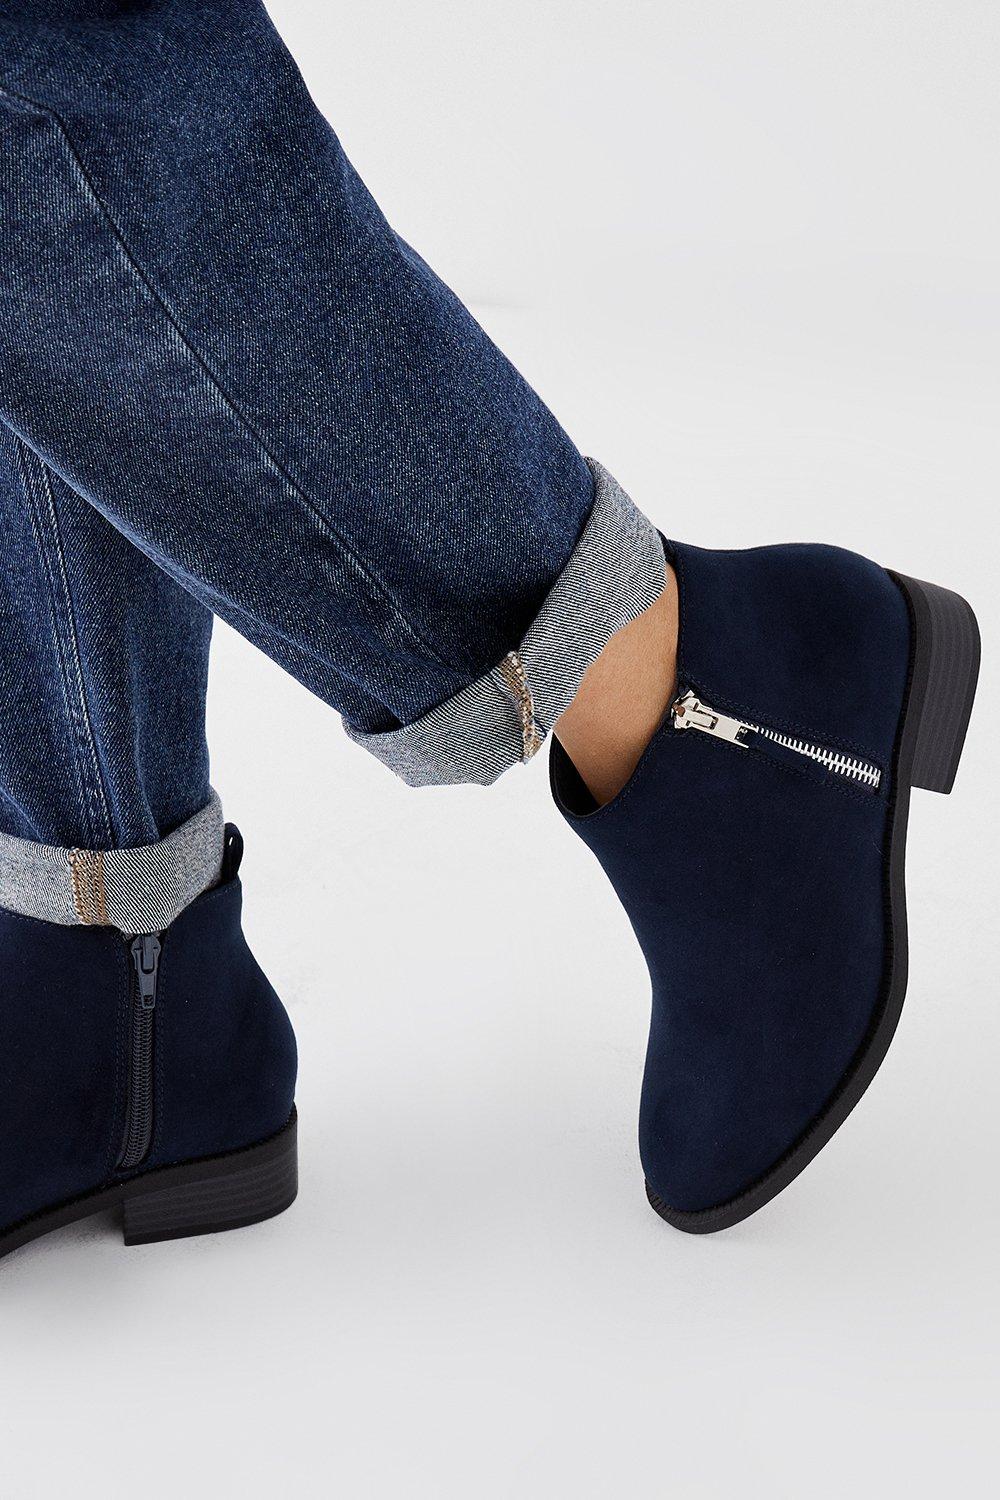 Women's Wide Fit Madrid Zip Up Ankle Boots - navy - 6